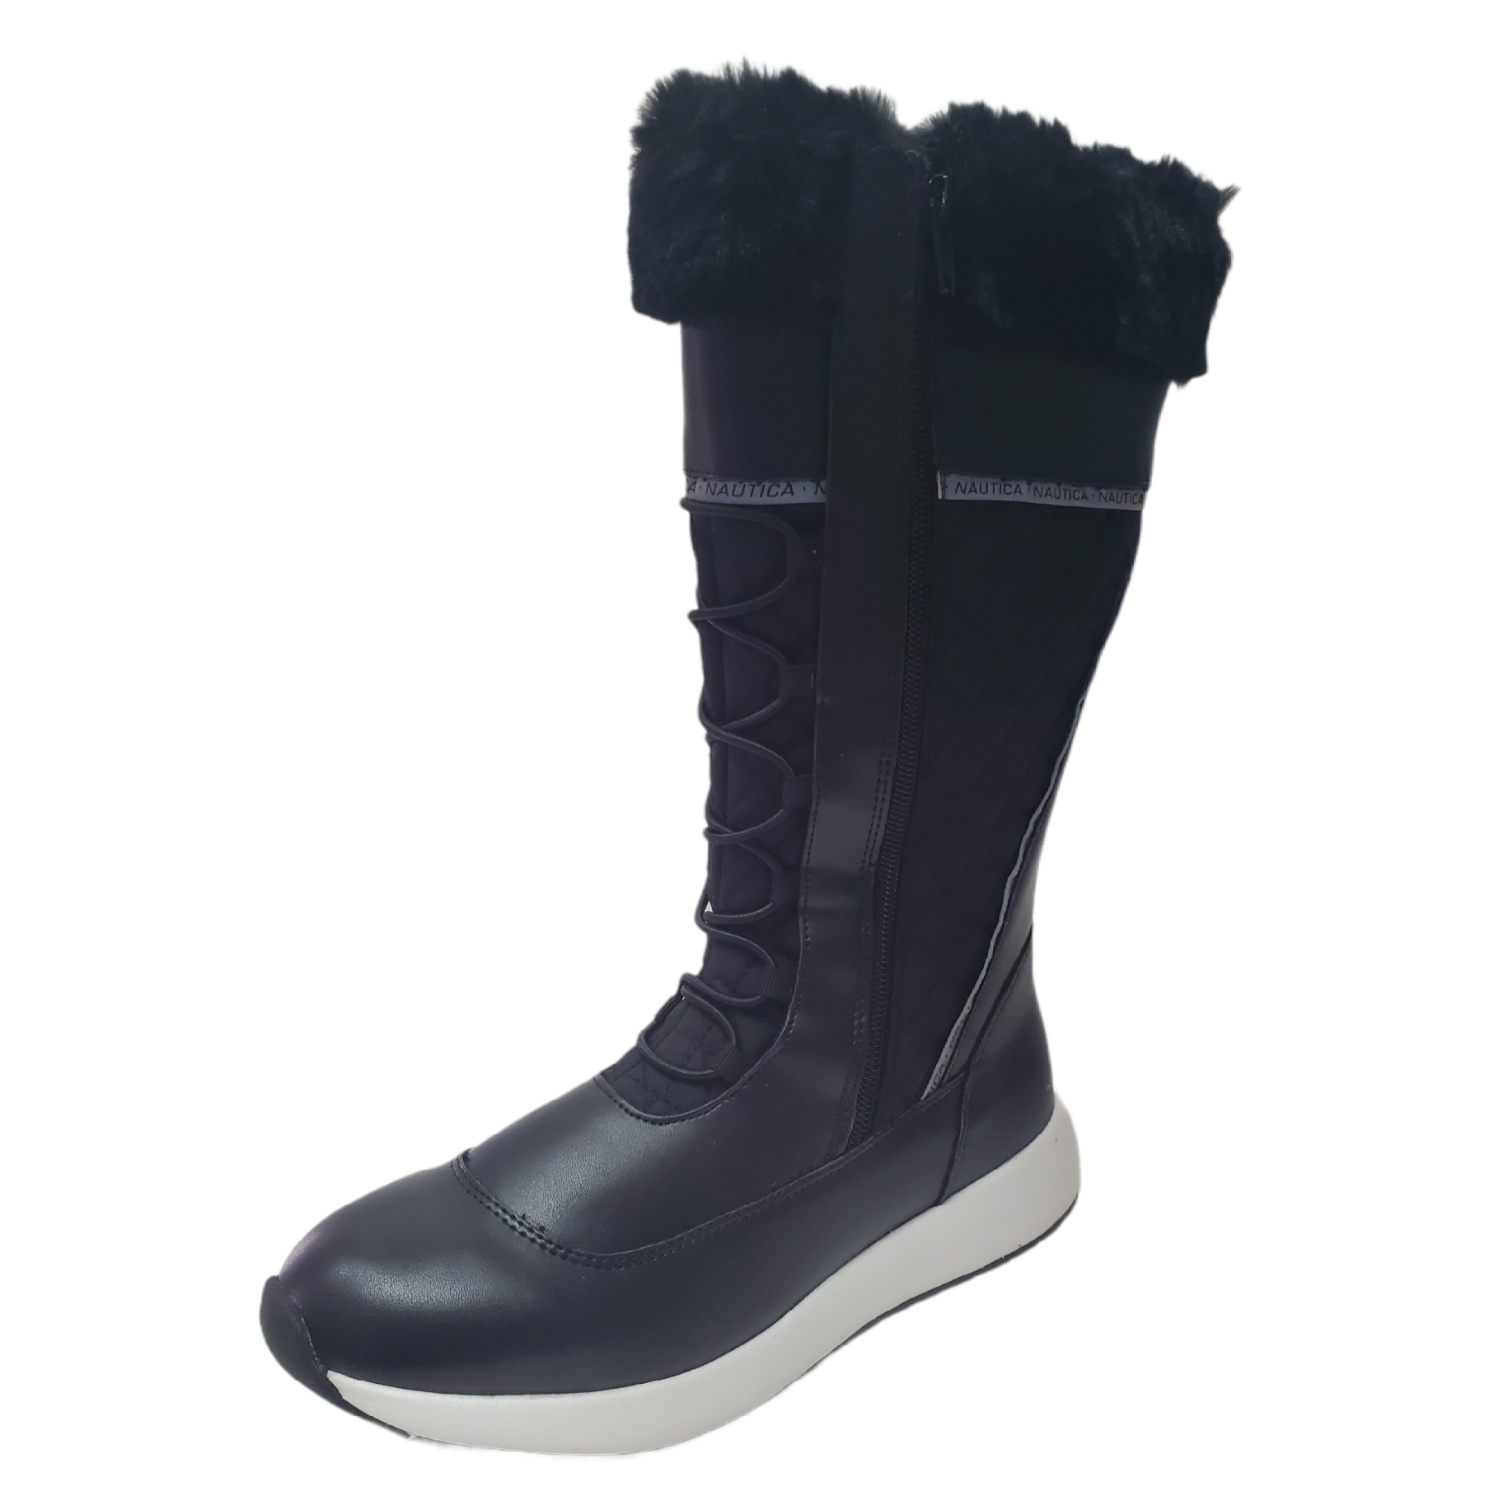 Nautica Women's Everly Cold Weather Winter Boots Black 7.5 M US